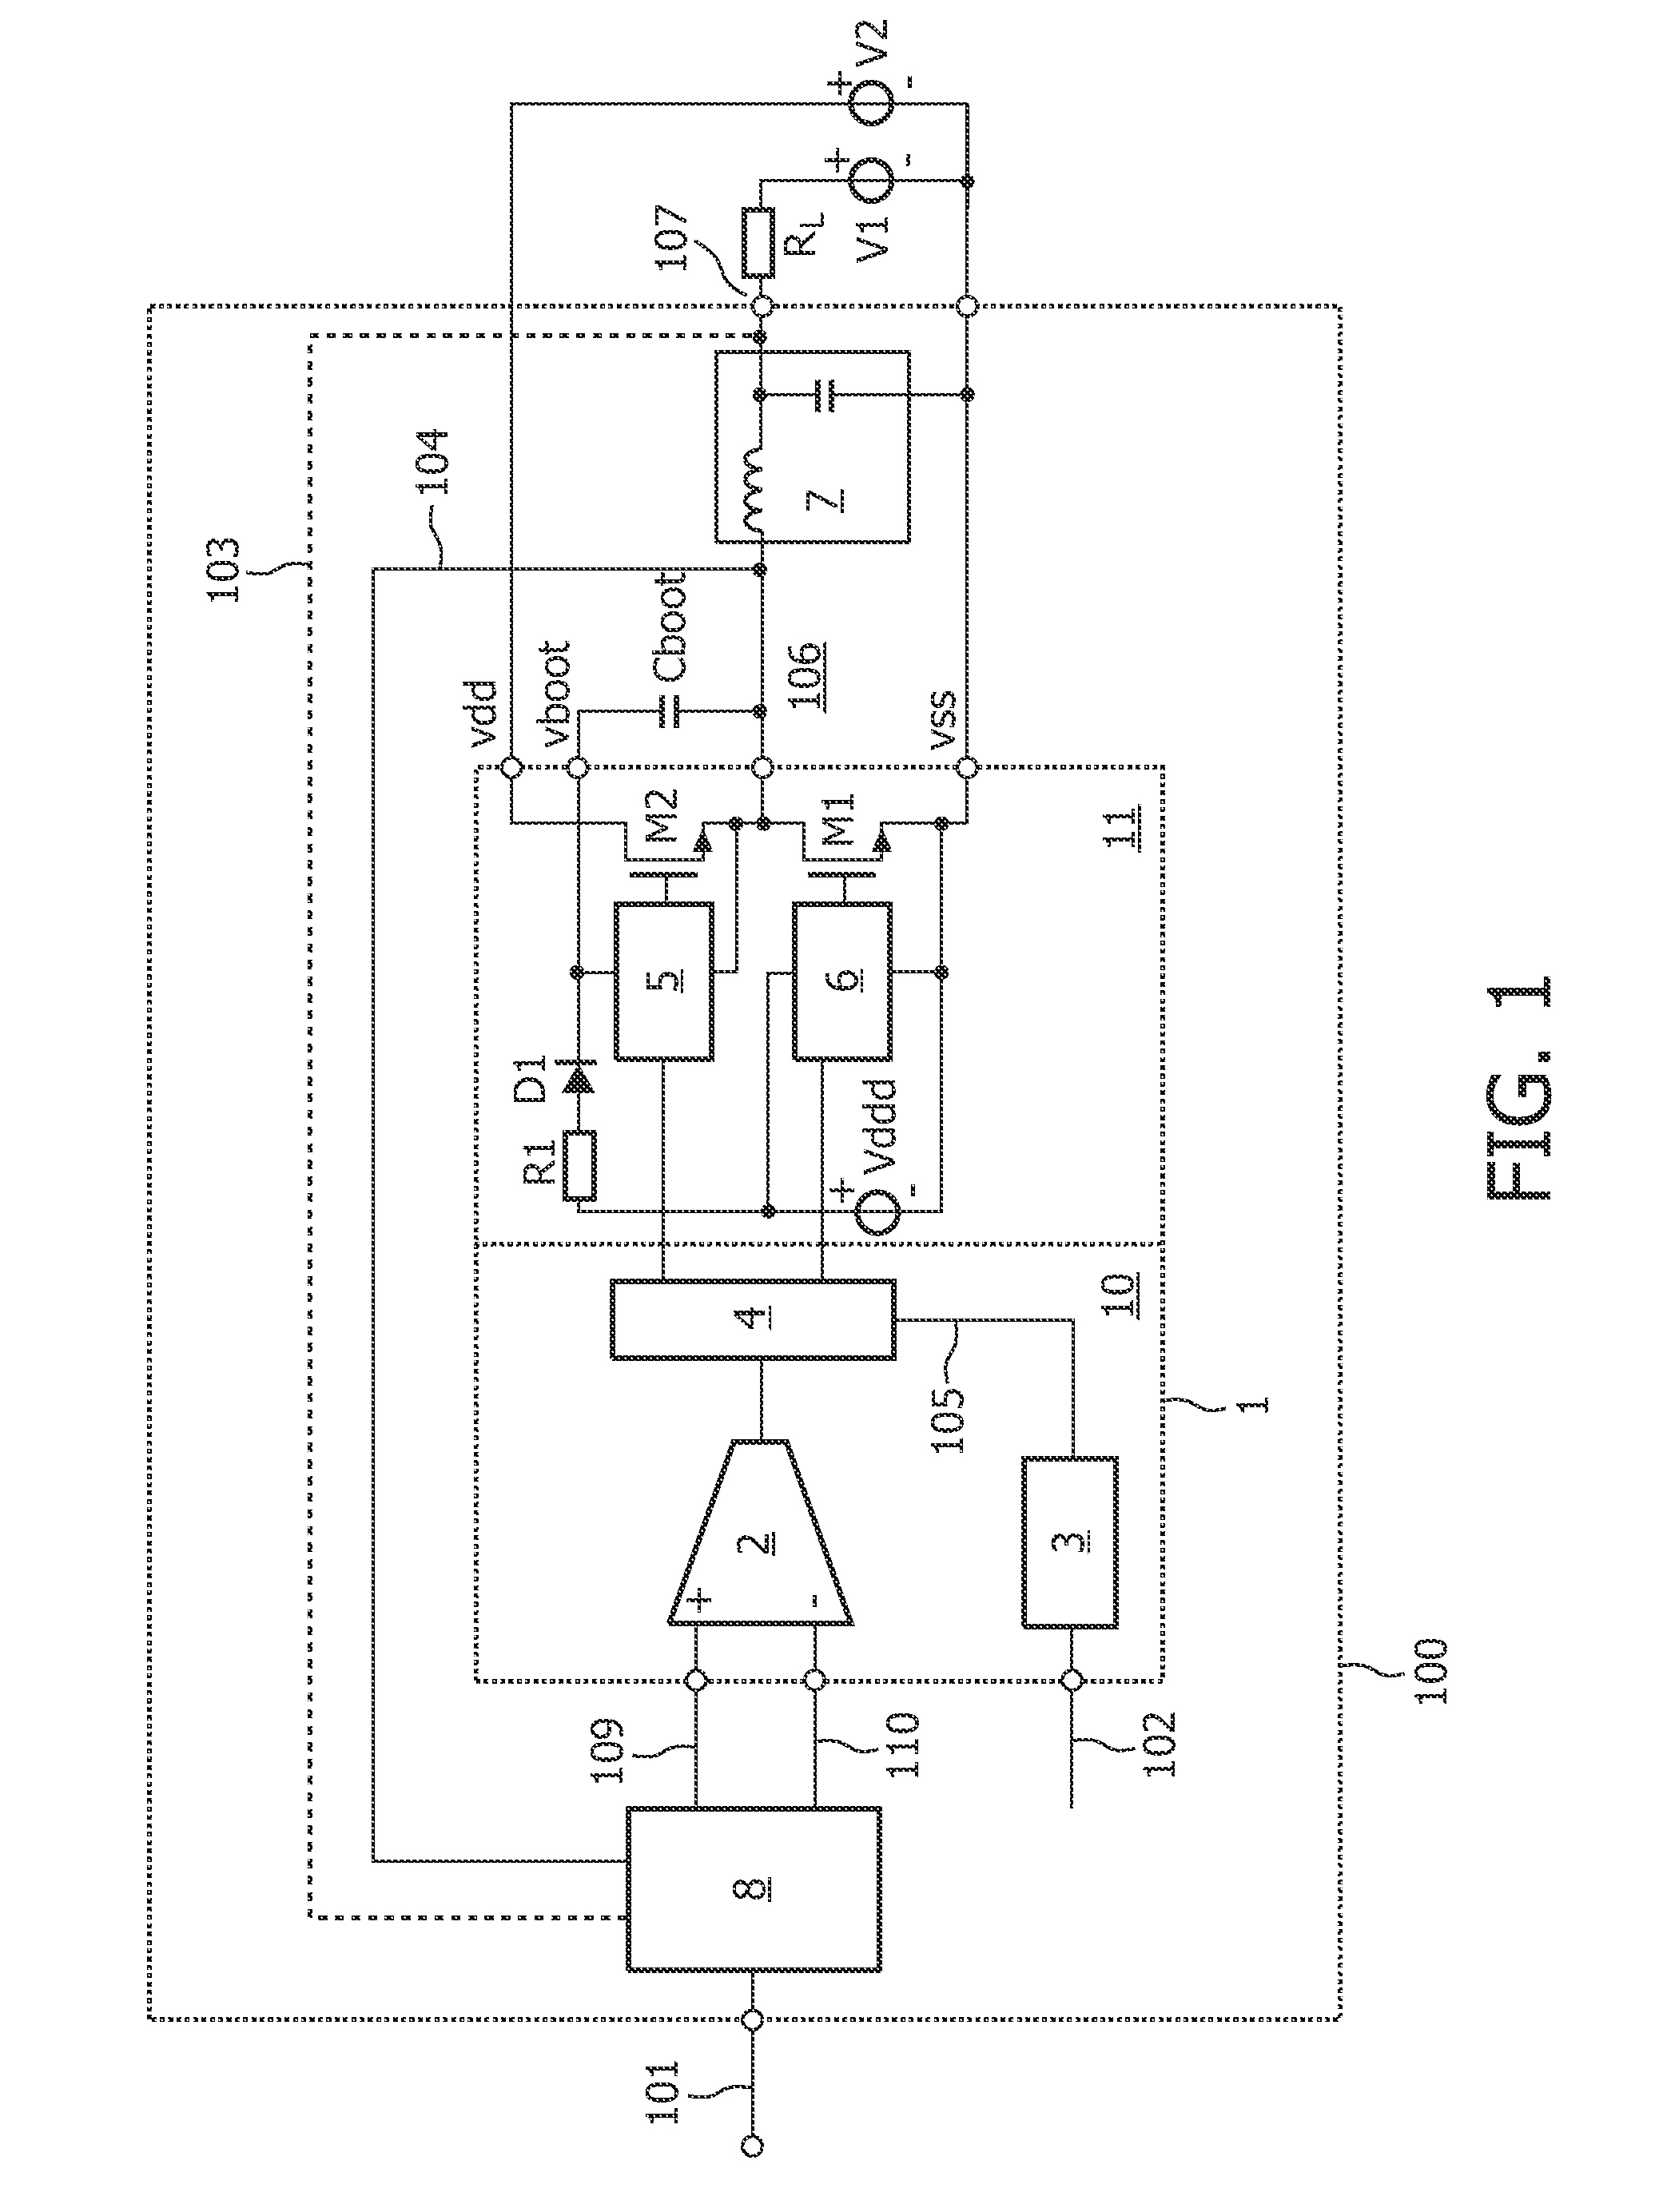 Electronic device for self oscillating class d system